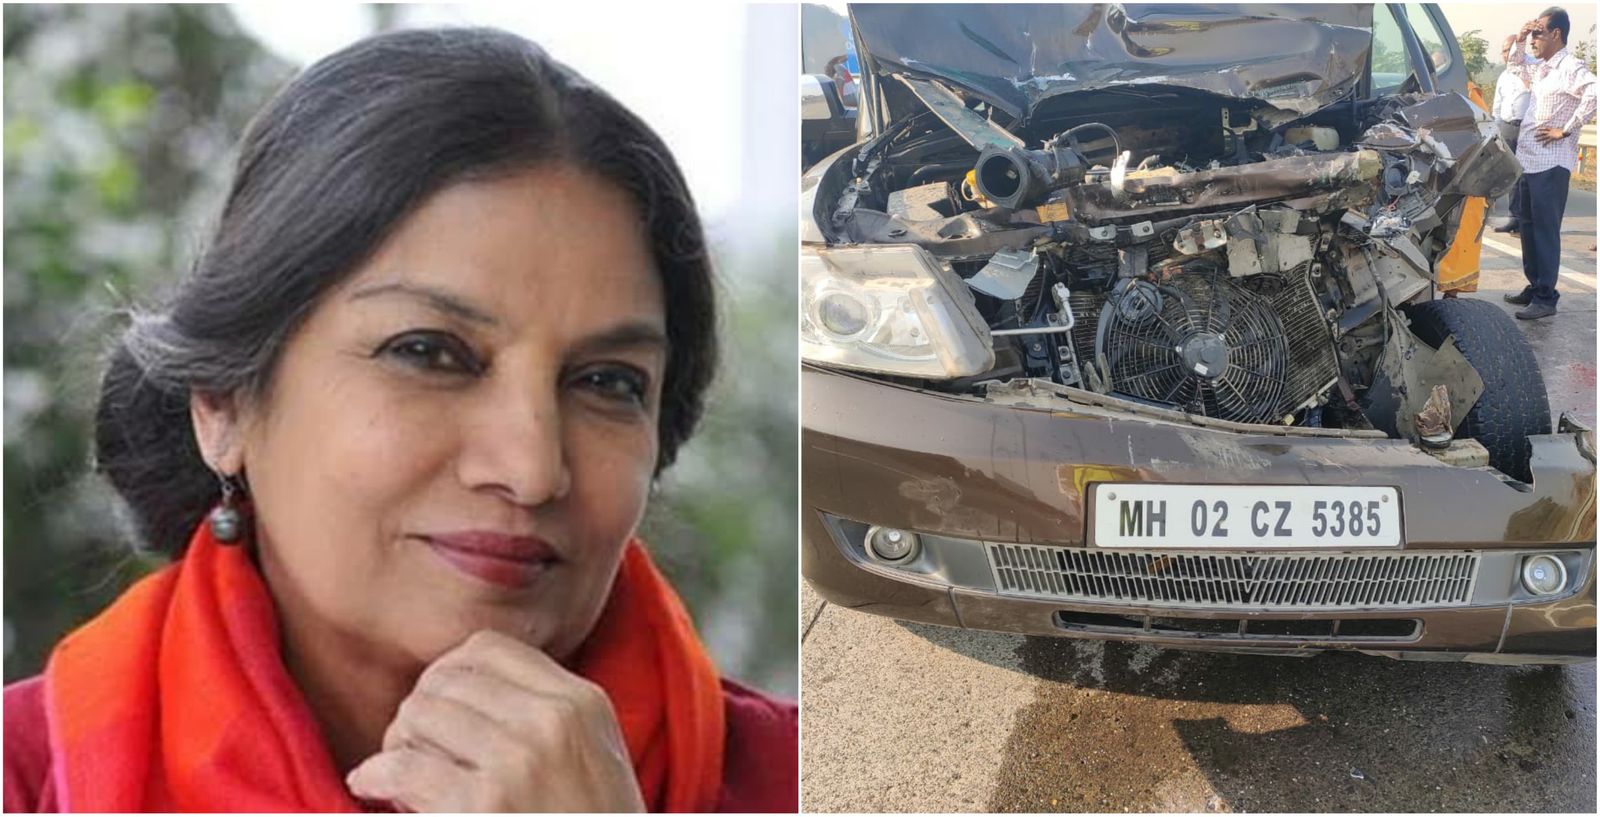 Shabana Azmi Critically Injured After Her Car Met With An Accident On Mumbai - Pune Expressway